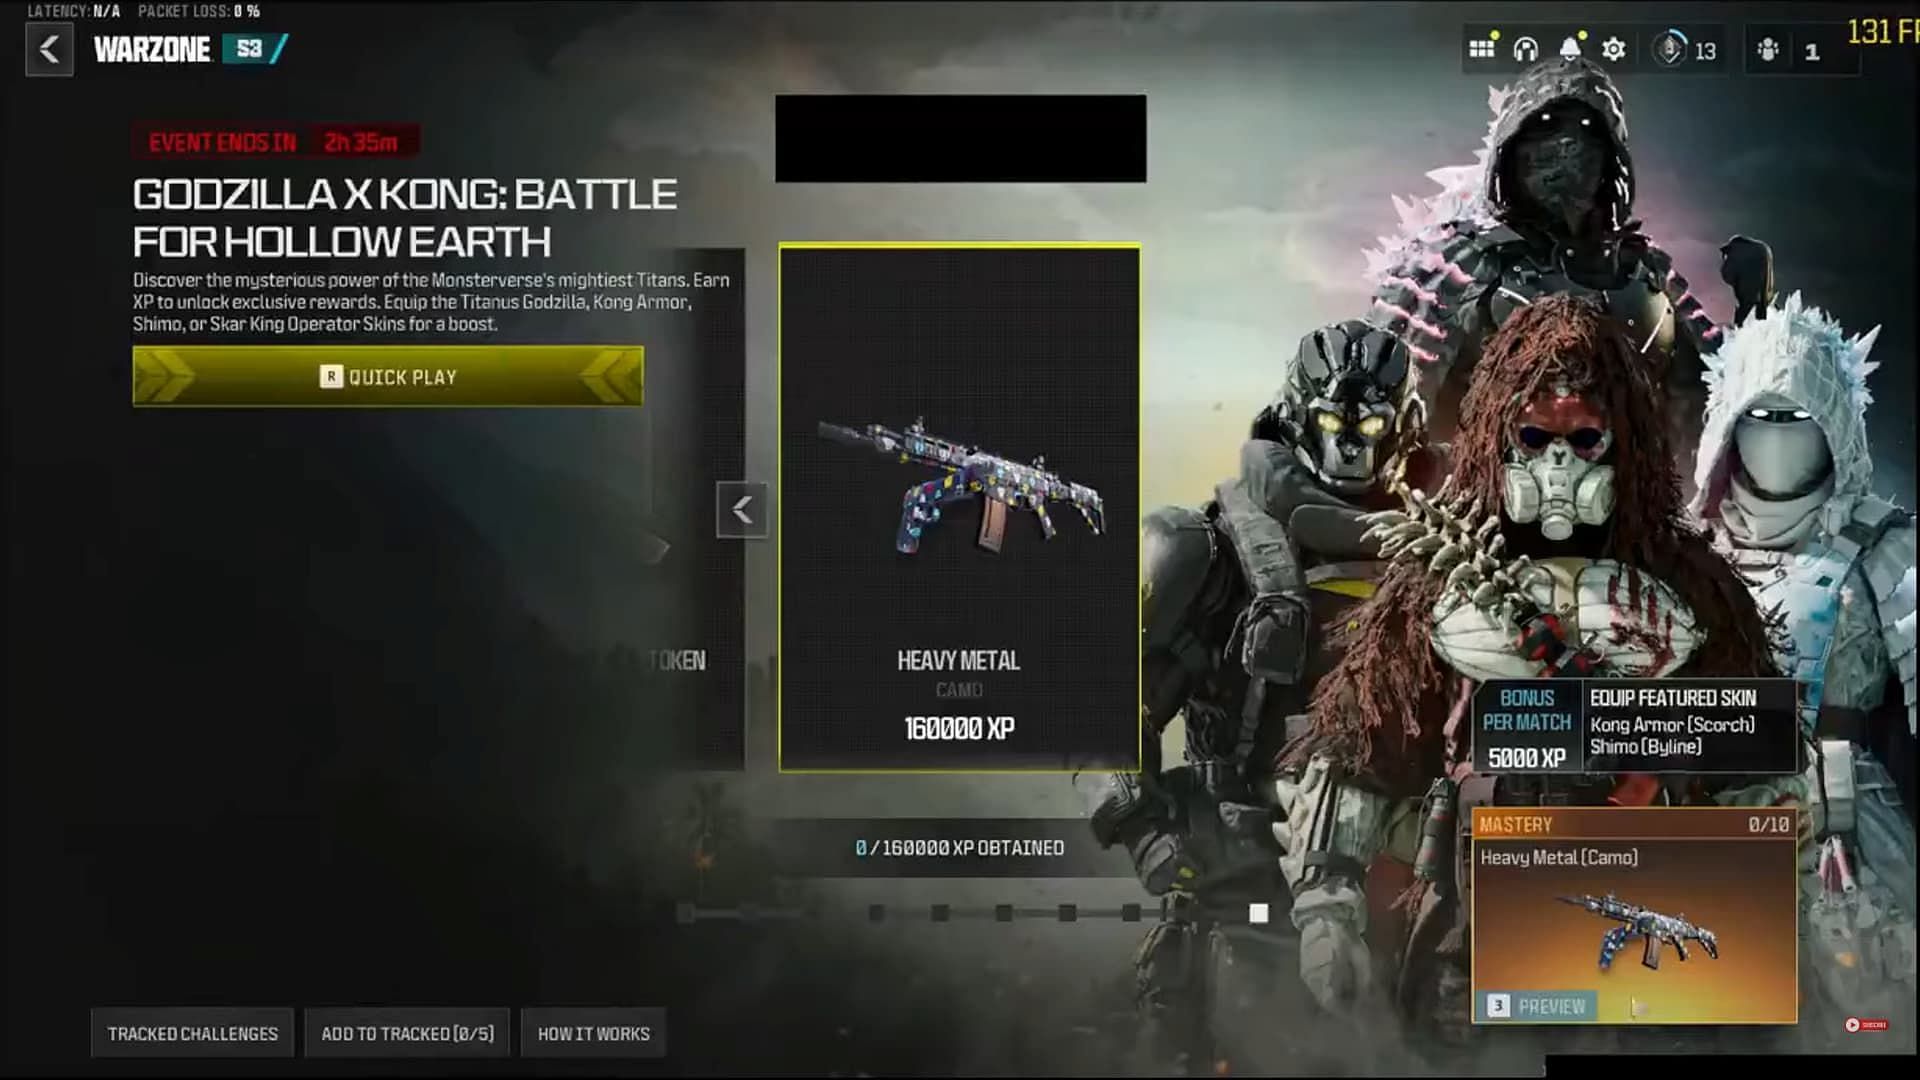 Event rewards for Godzilla x Kong event in MW3 and Warzone (Image via Activision)